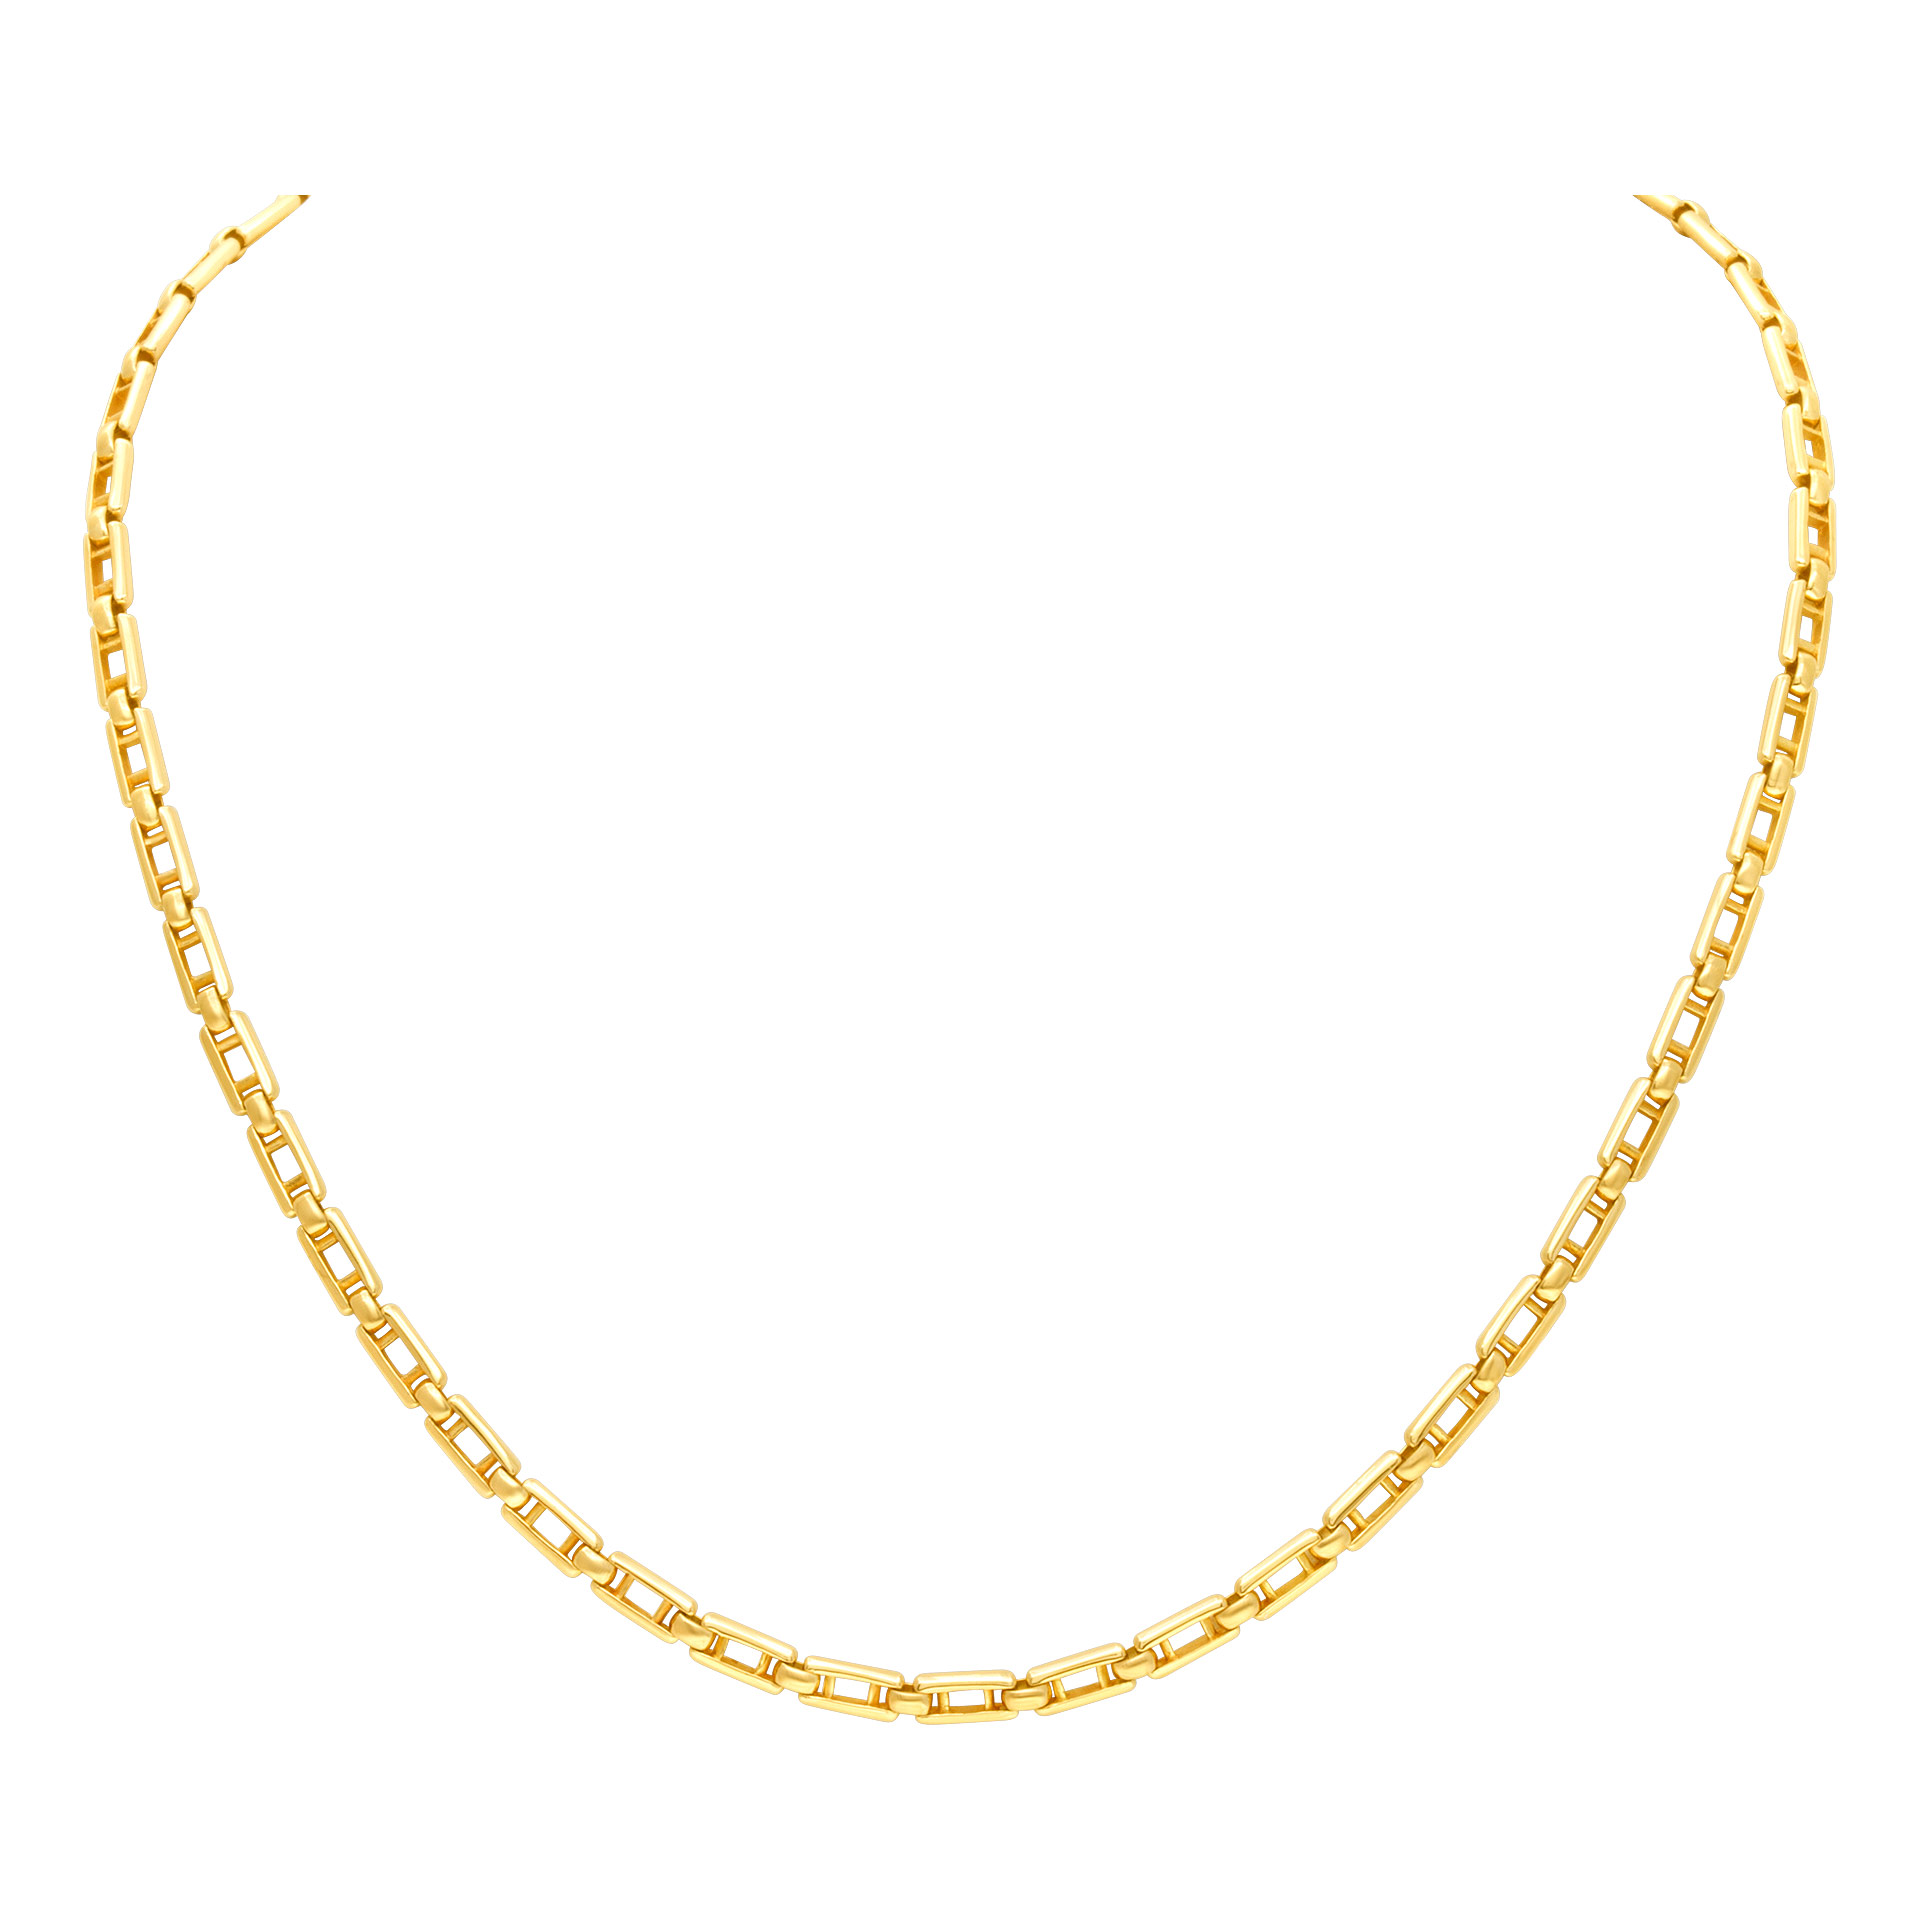 Cartier link necklace in 18k yellow gold. Length- 18" inches.